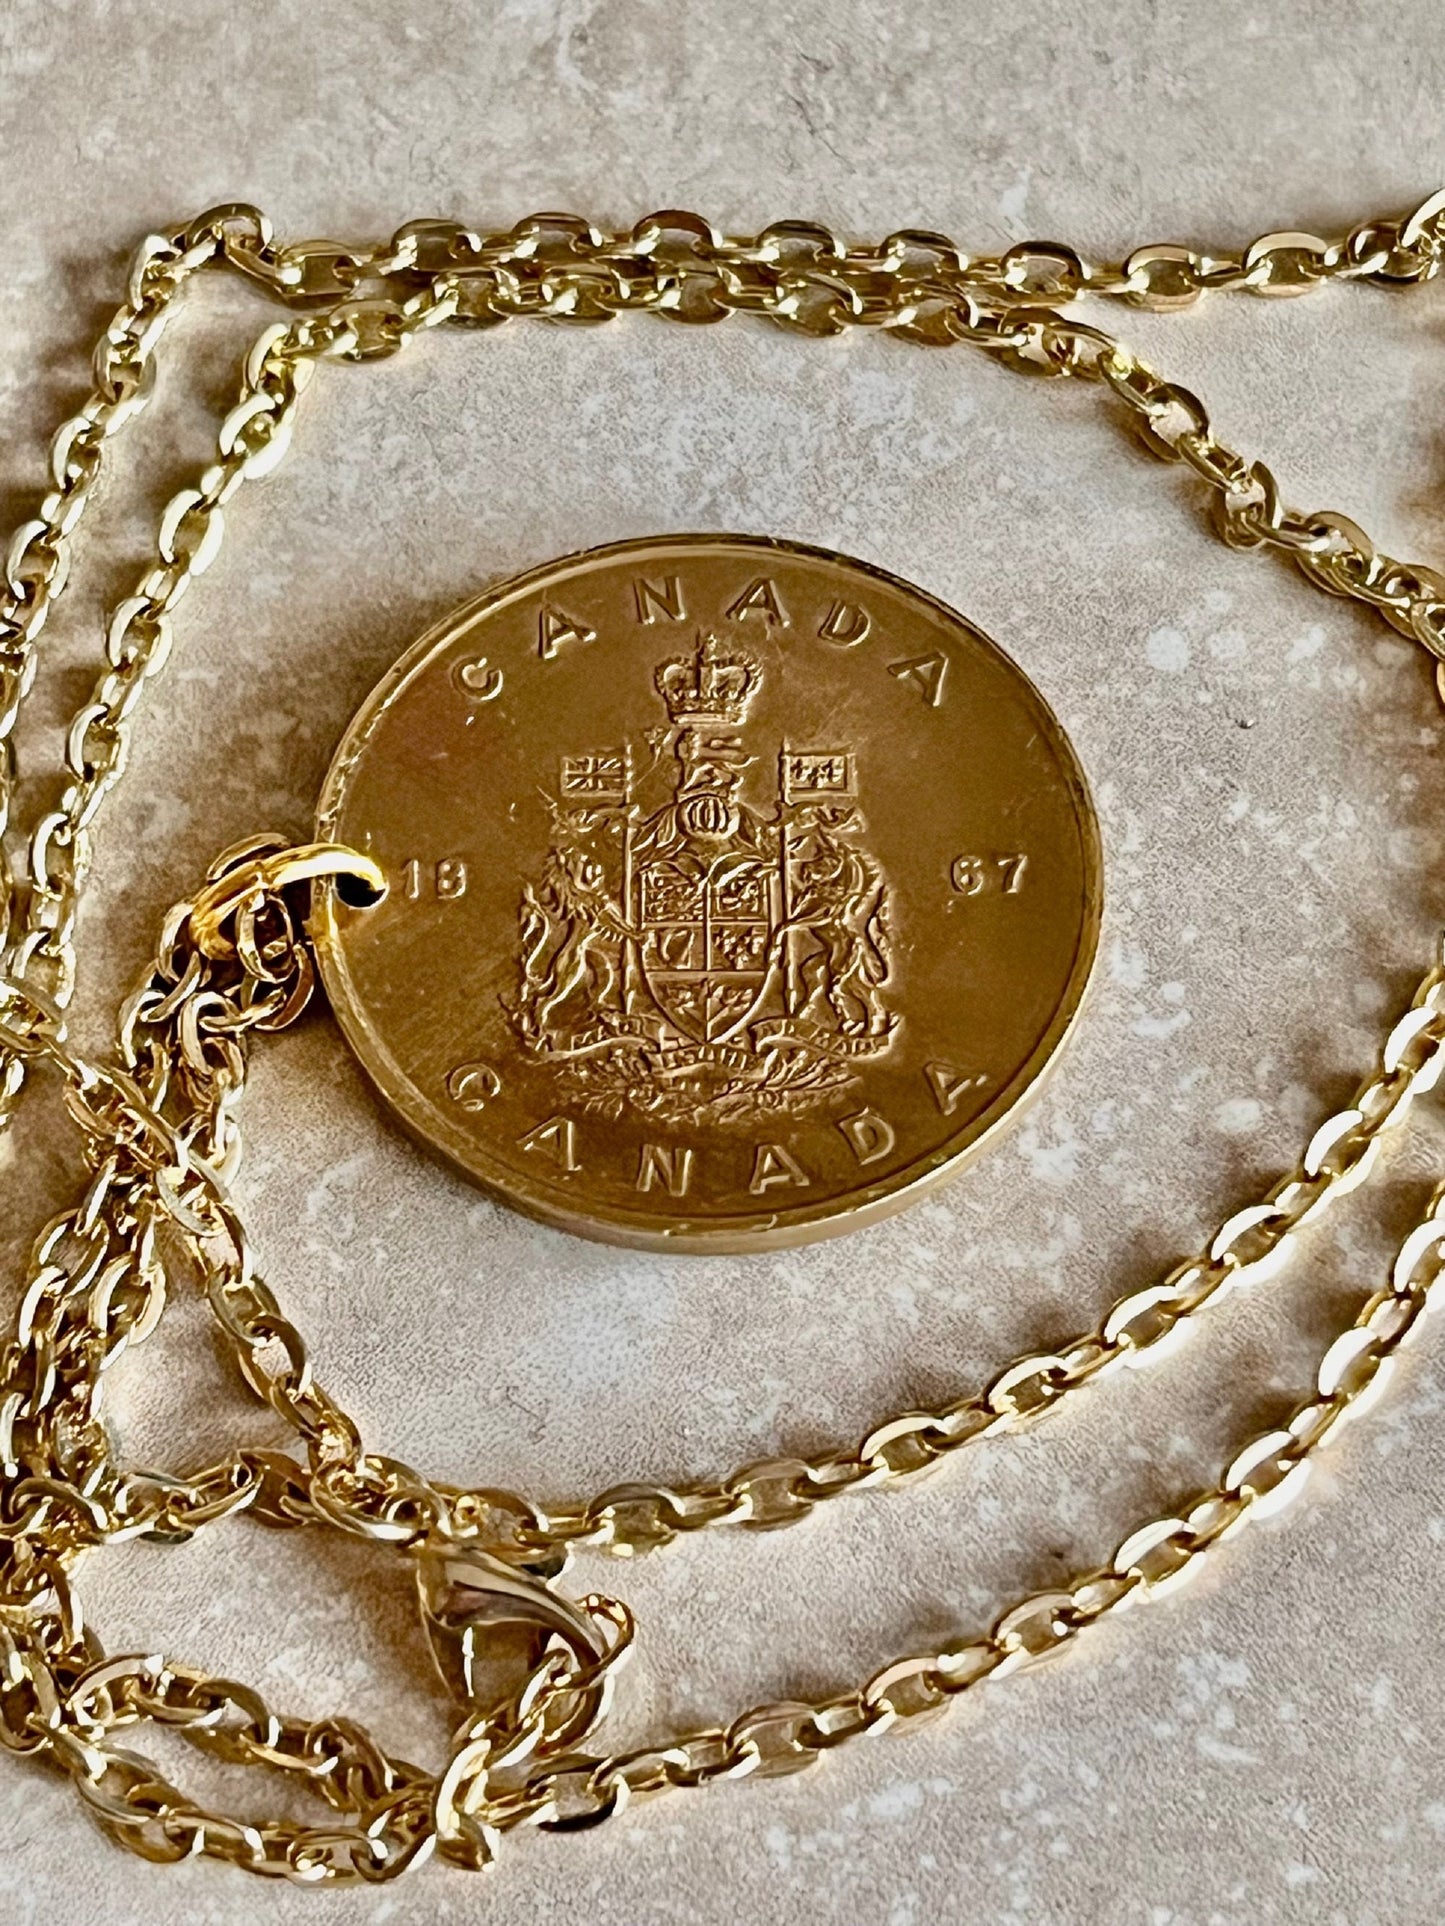 Canada Provinces Token Coin Canadian Necklace Pendant Keychain Personal Handmade Jewelry Gift Friend Charm For Him Her World Coin Collector